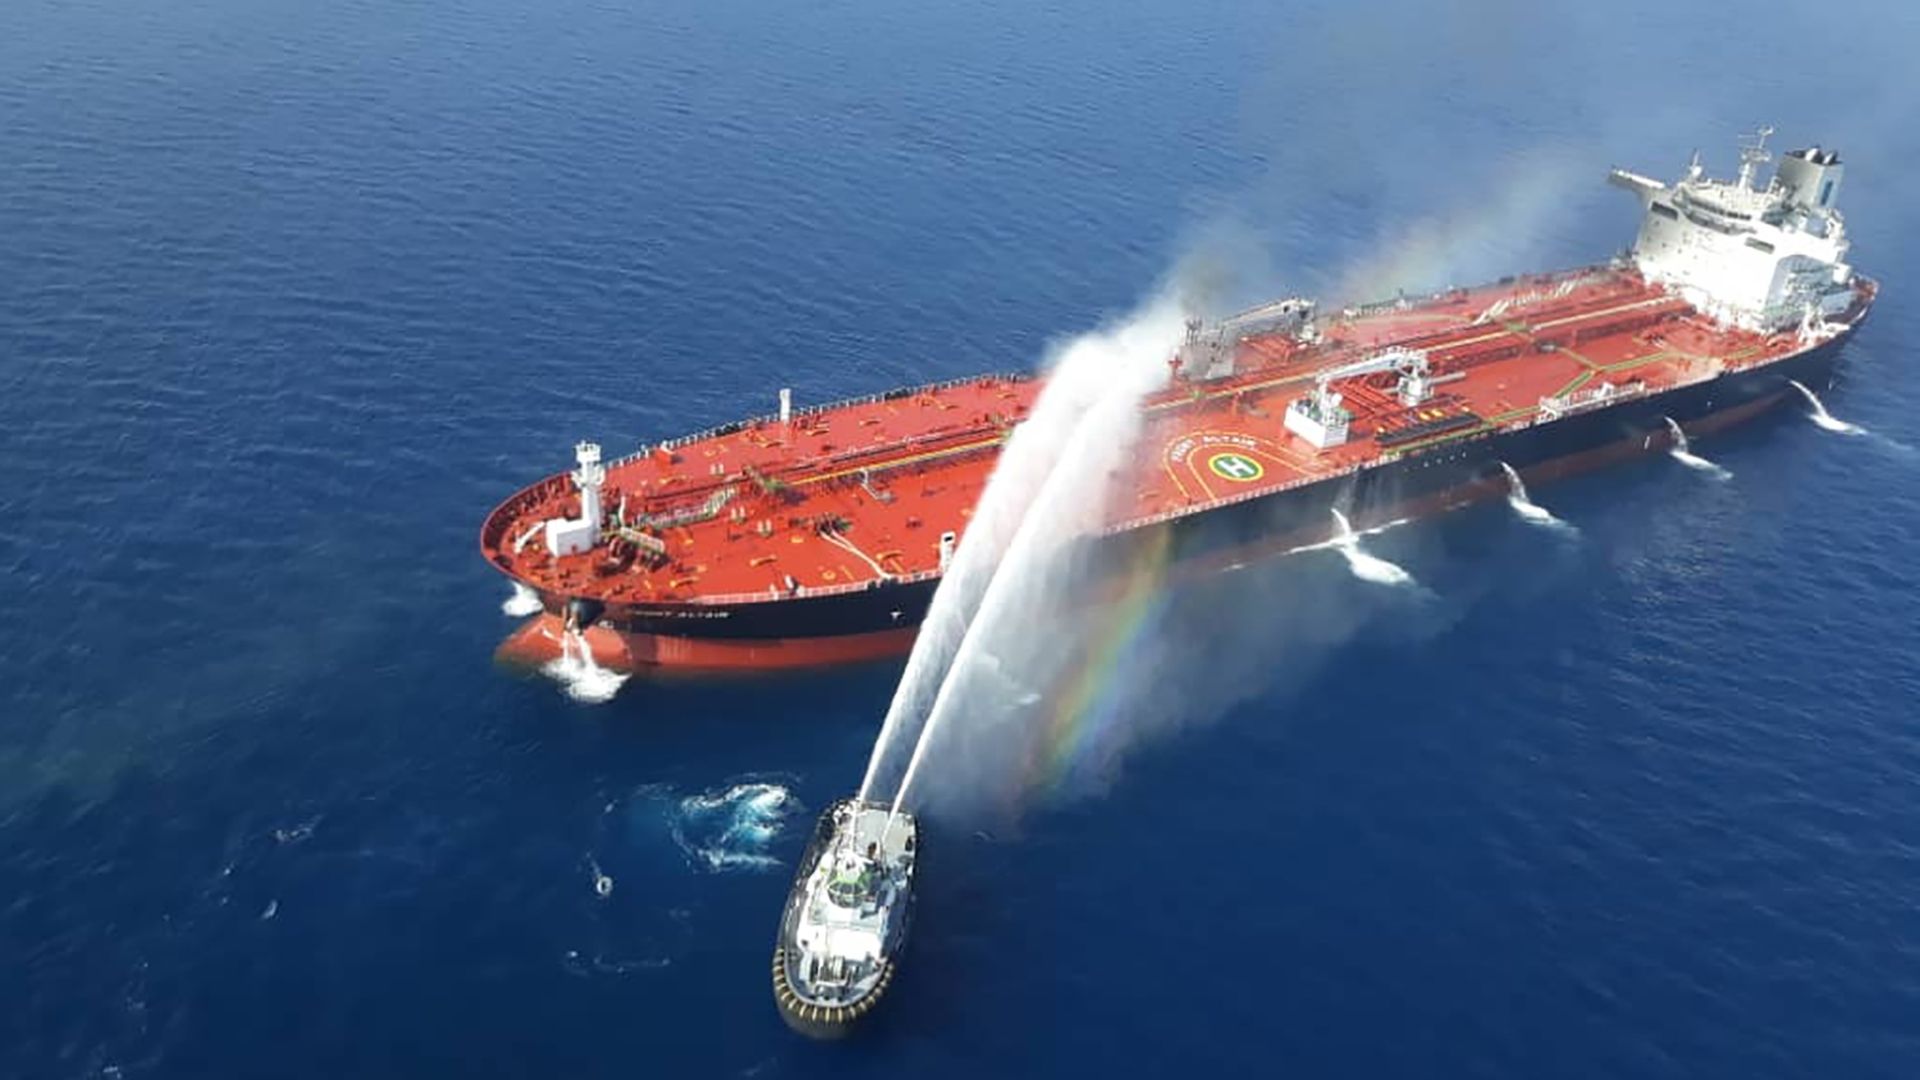 This image is a birds eye view of an oil tanker being sprayed with water from a smaller boat.